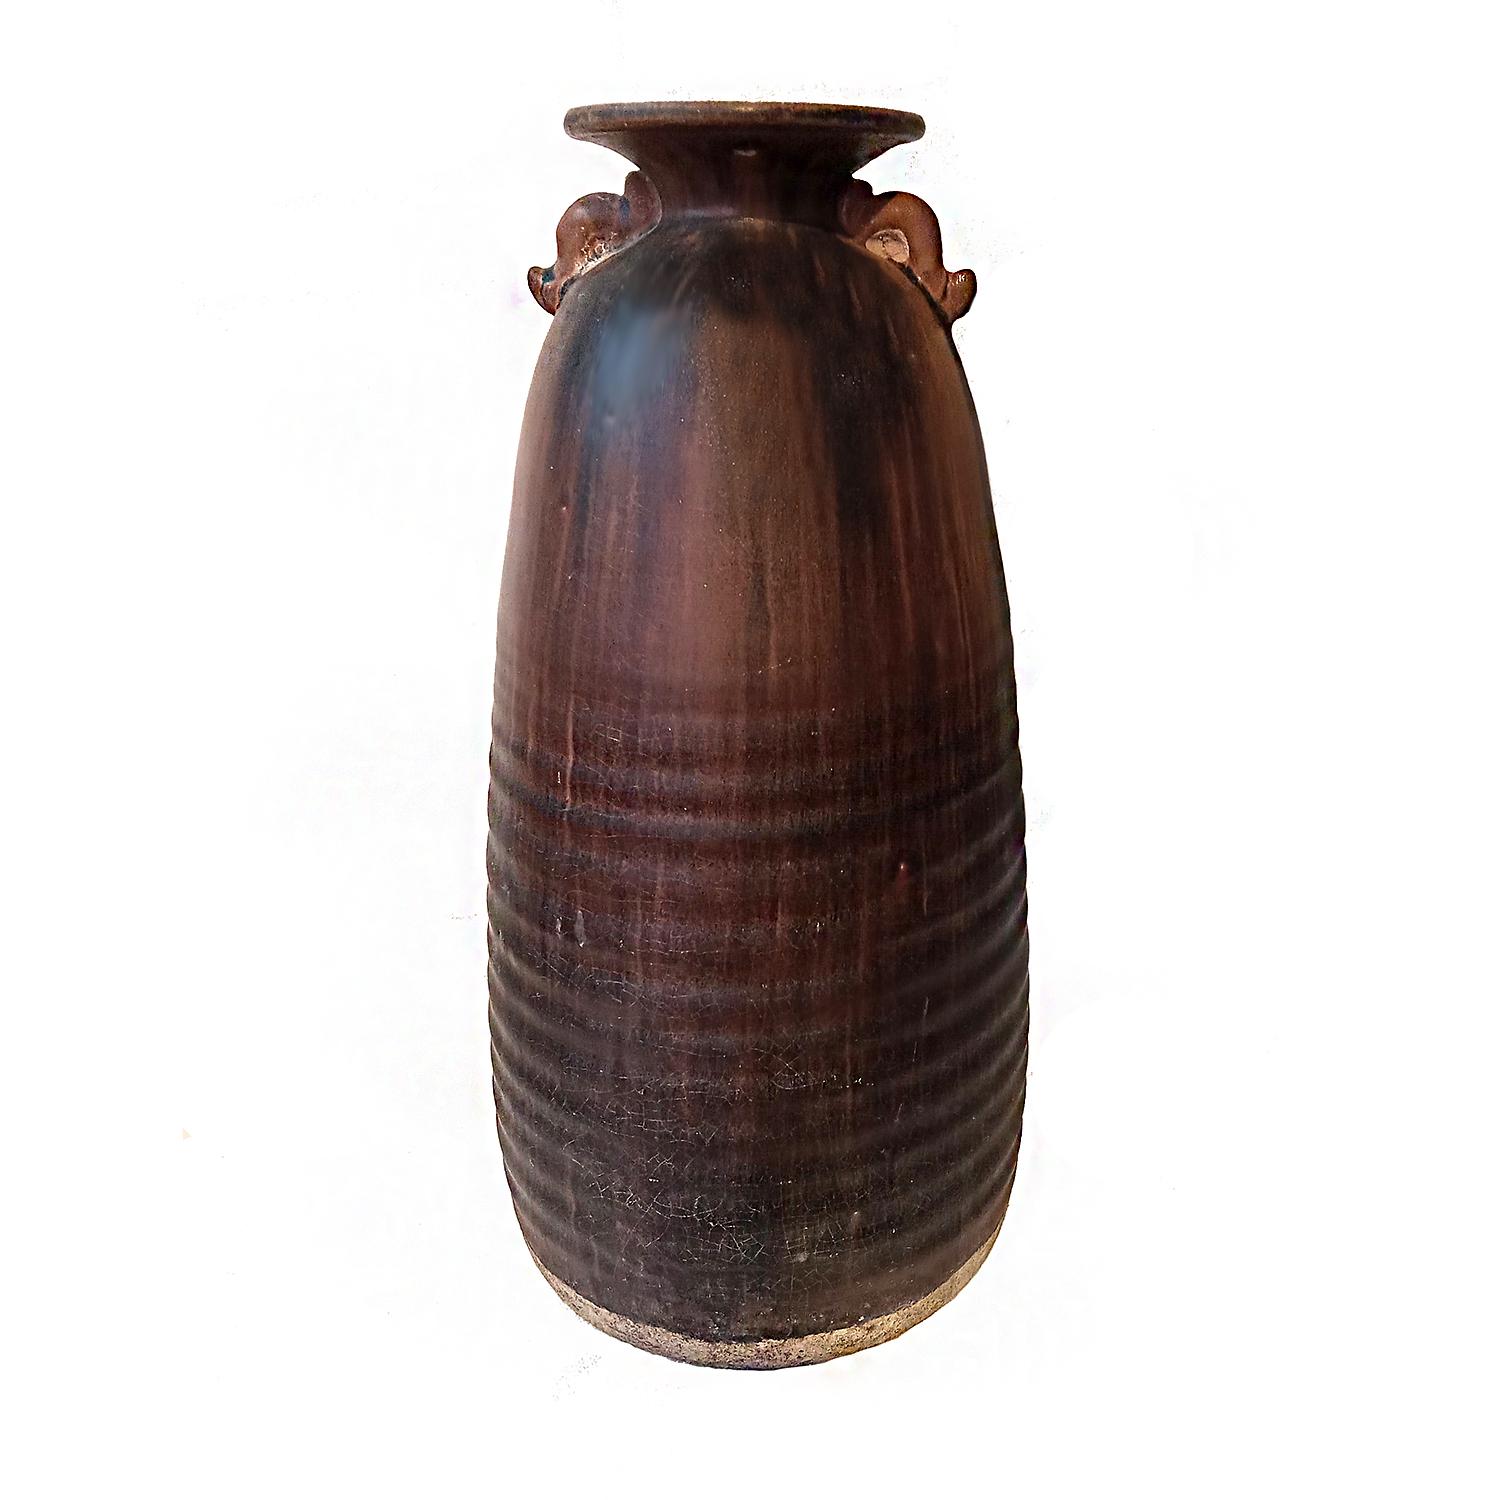 Tall Ceramic Thai Vase in Brown Mottled Glaze, with Looped Handles For Sale 3